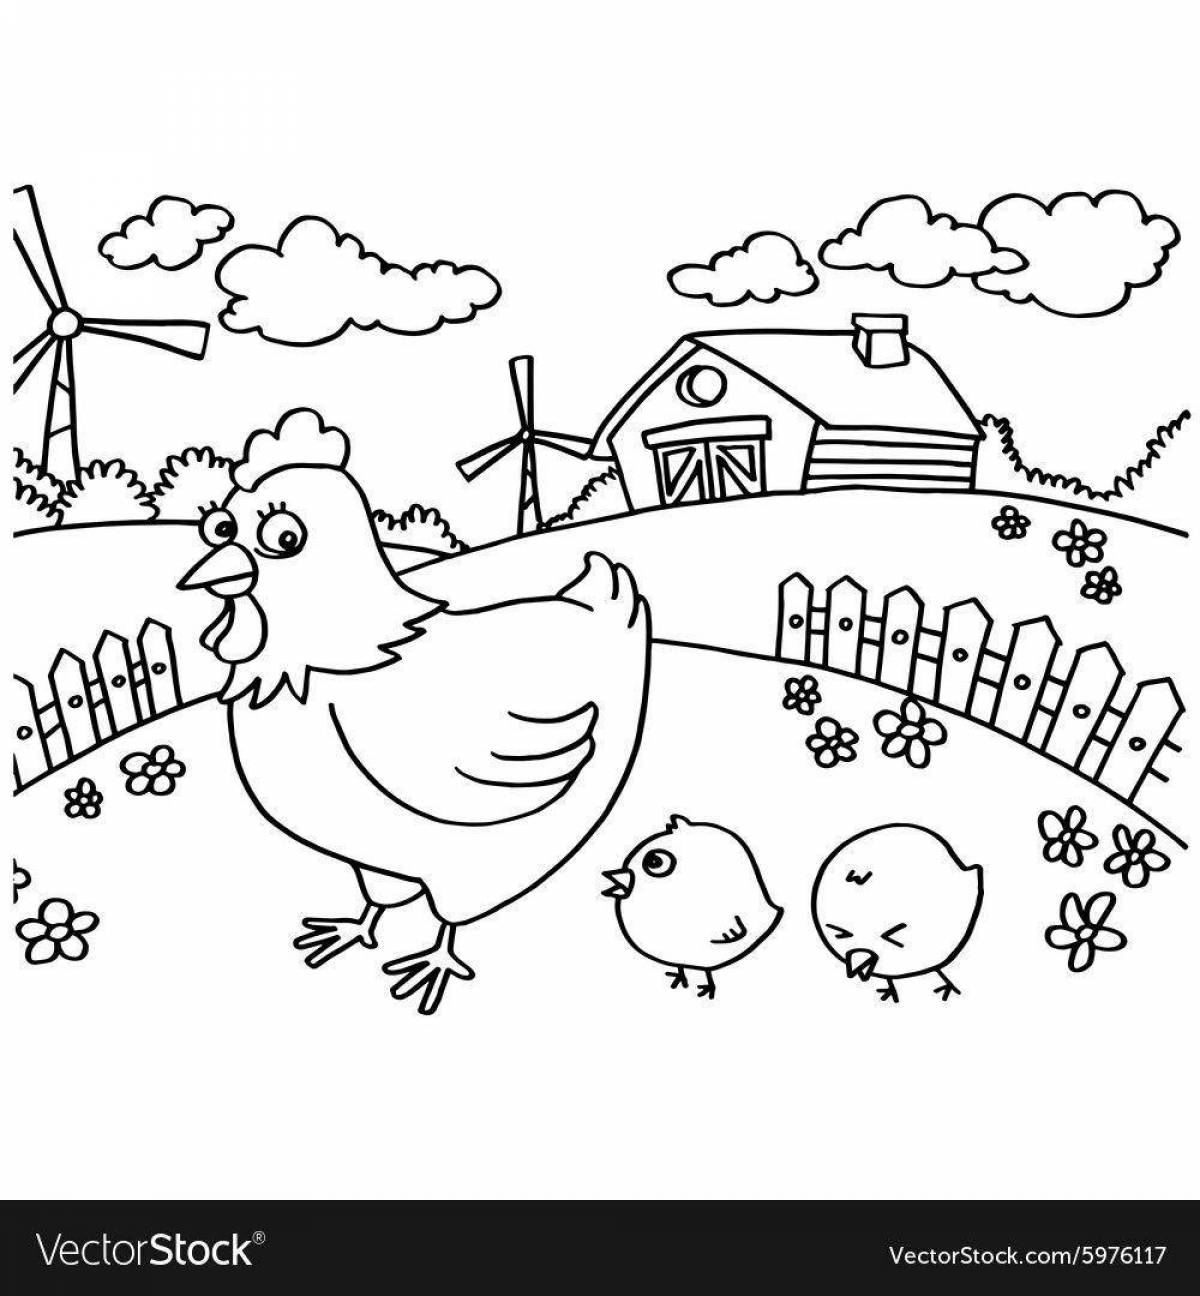 Coloring chicken coop for kids